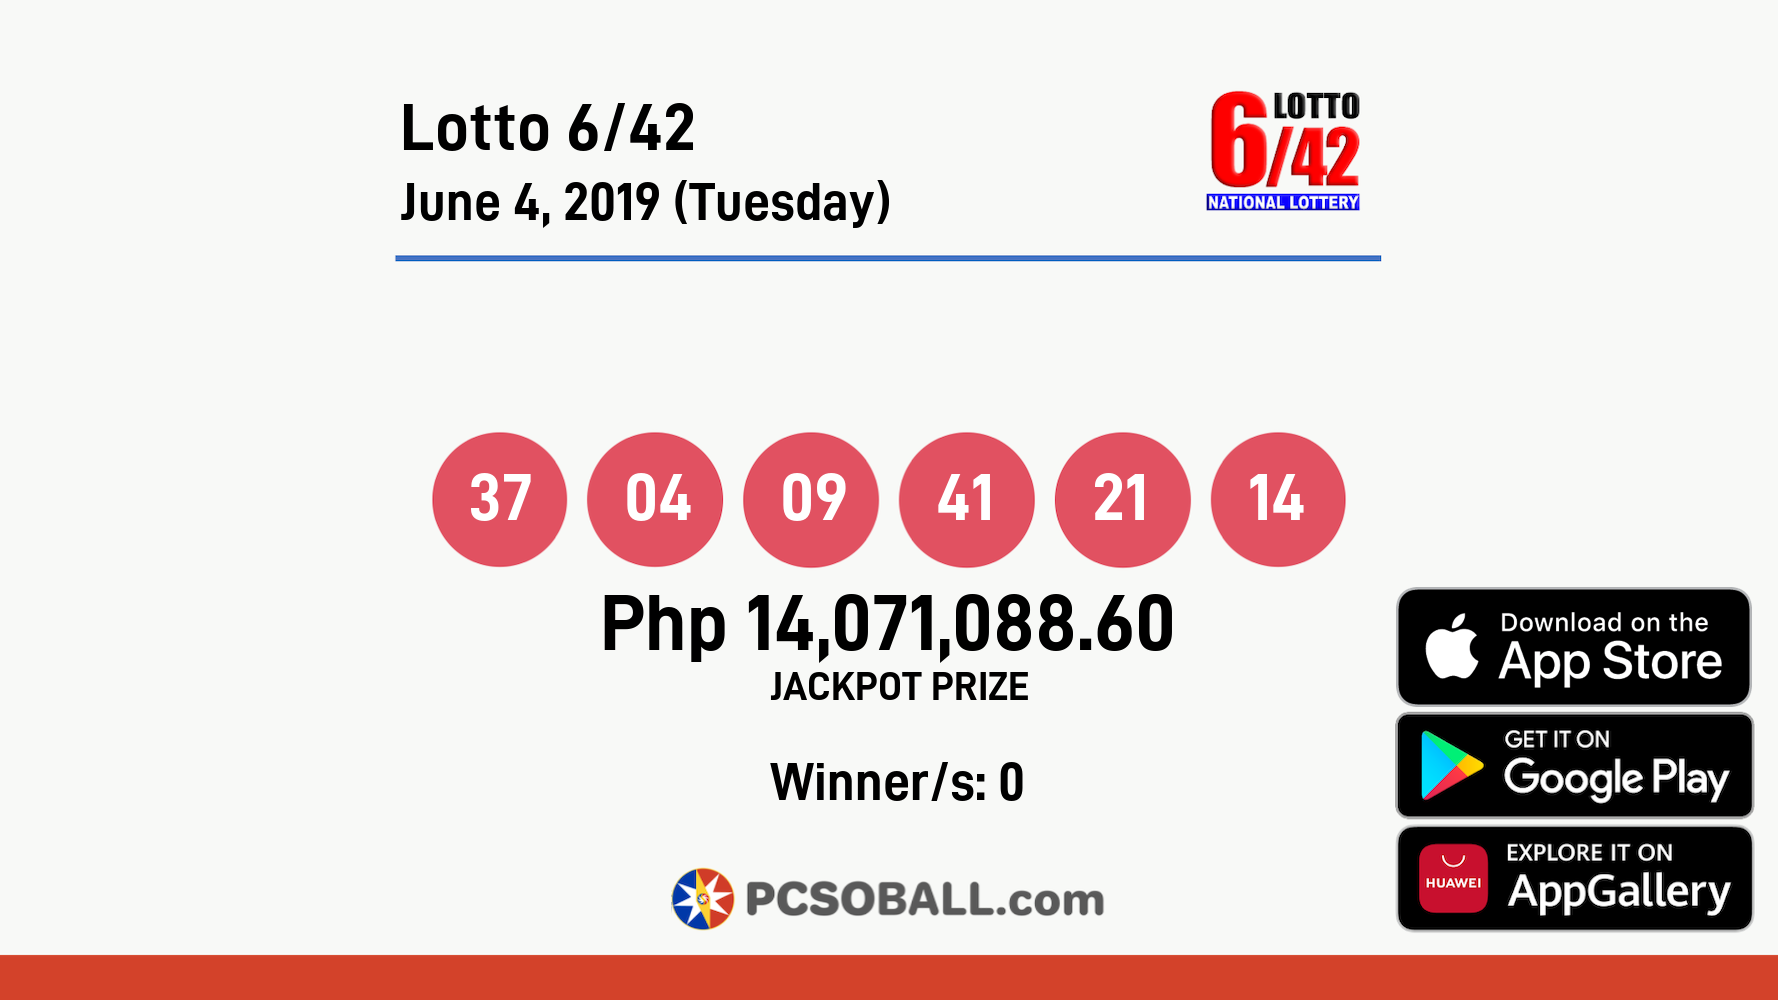 Lotto 6/42 June 4, 2019 (Tuesday) Result